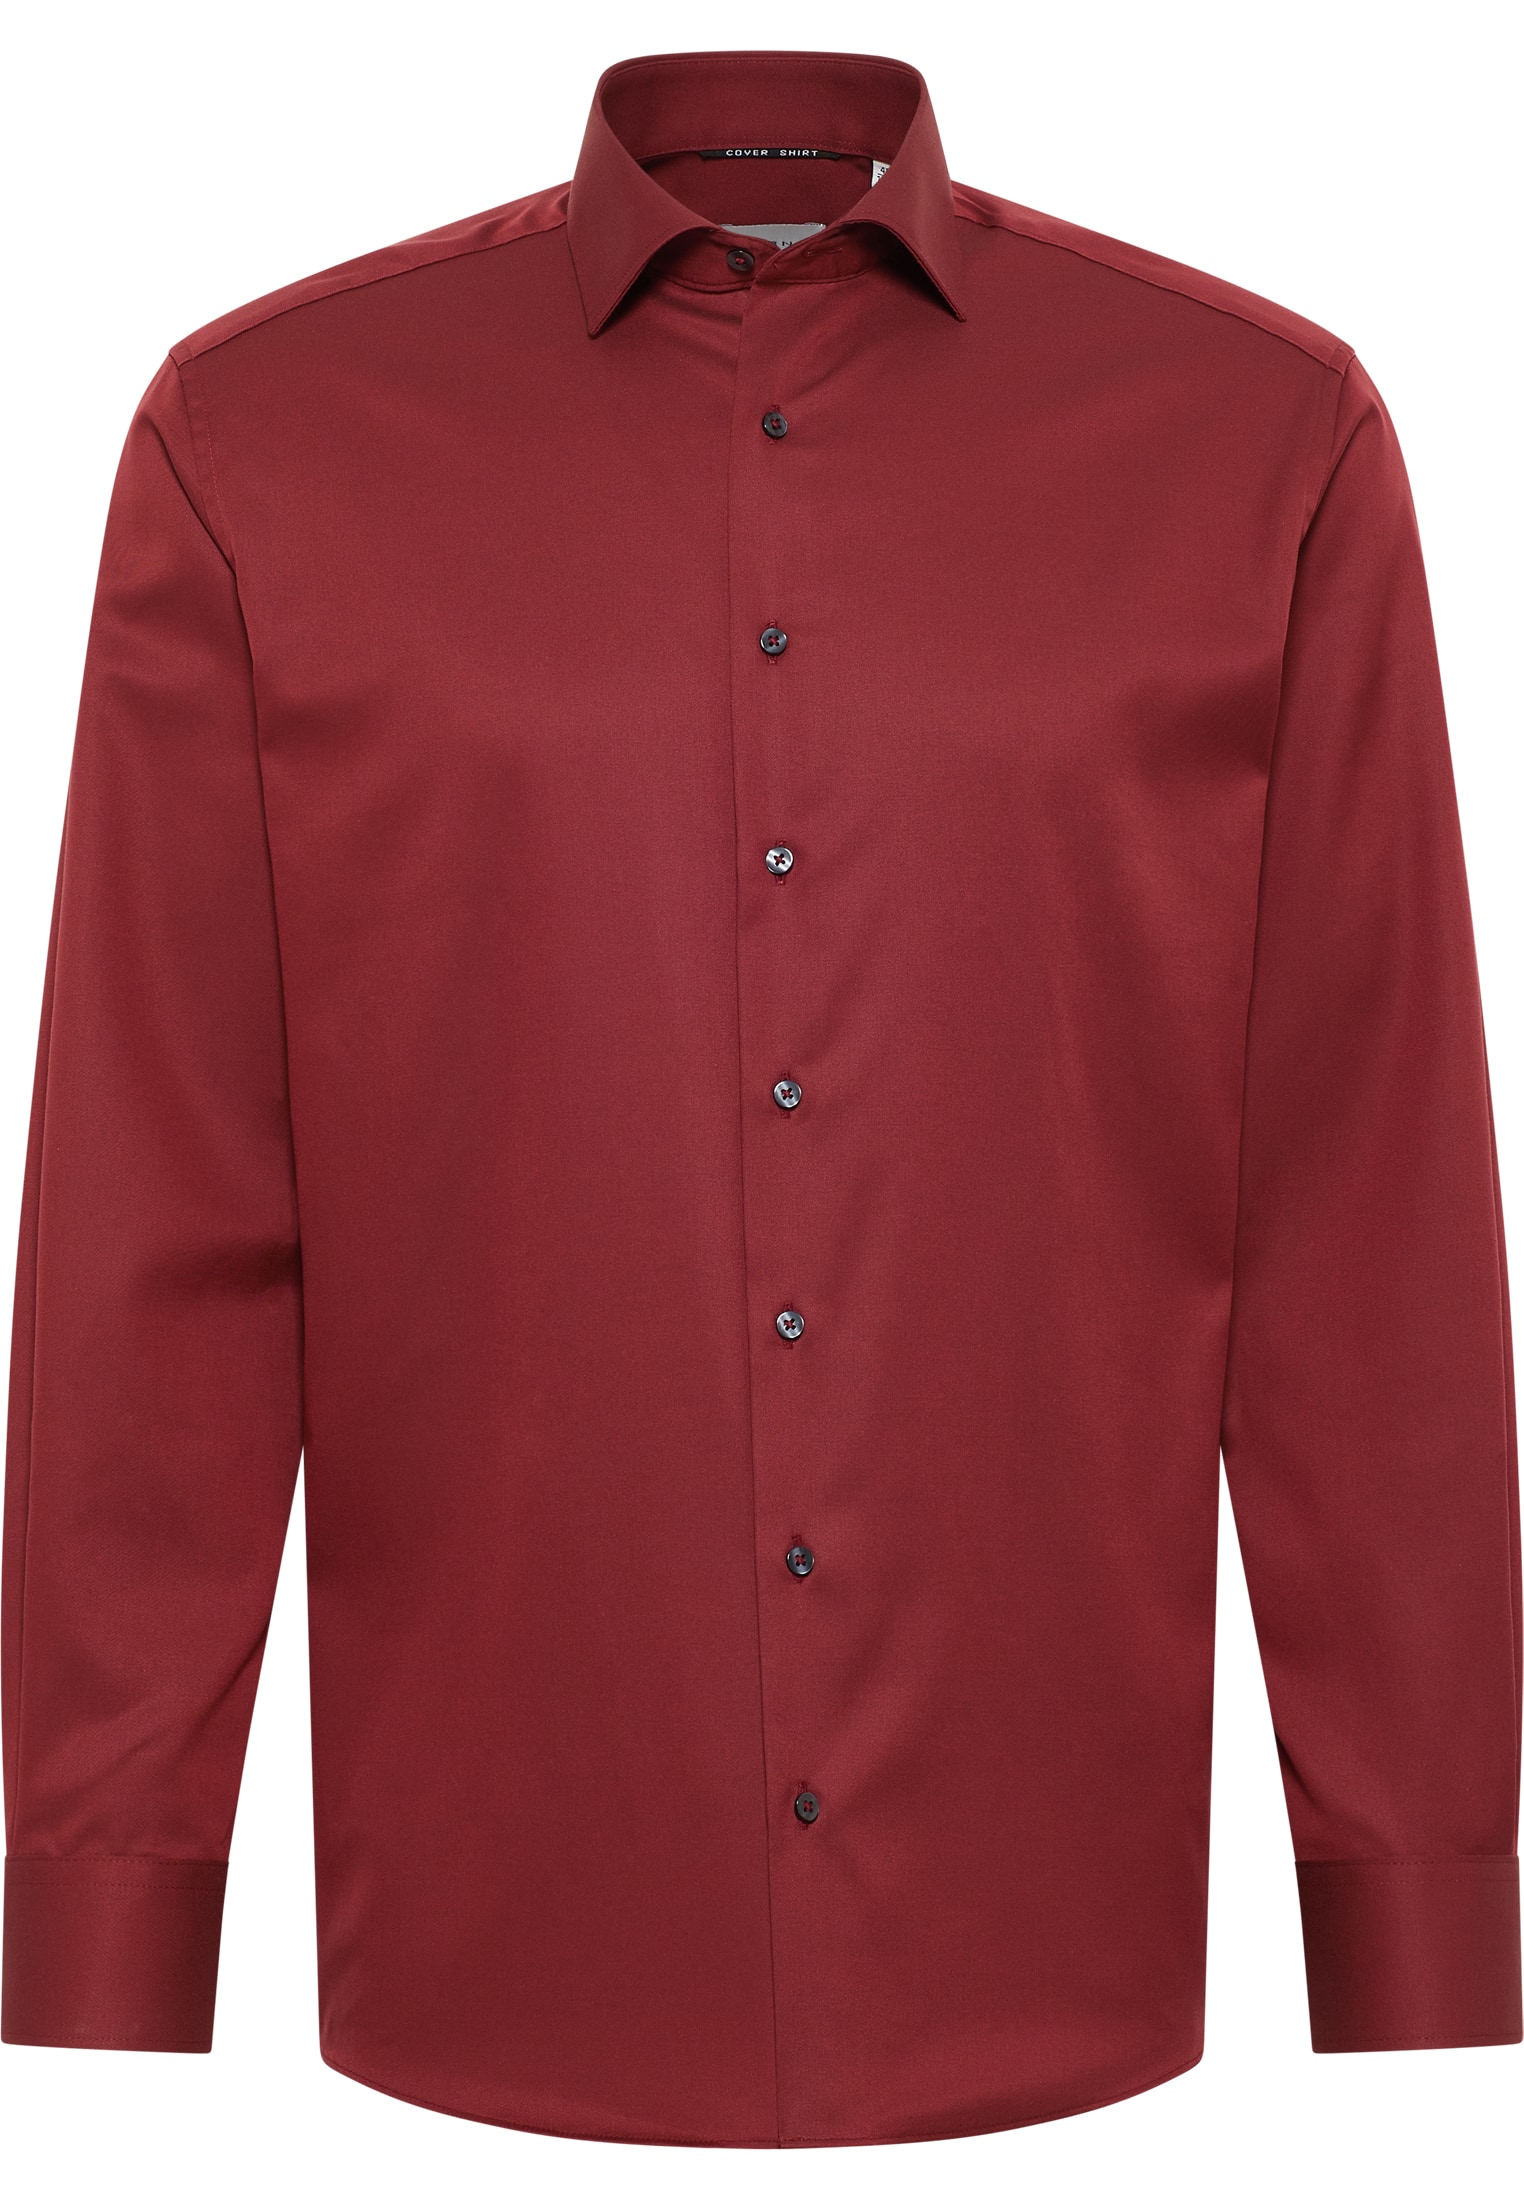 MODERN FIT Cover Shirt in donkerrood vlakte